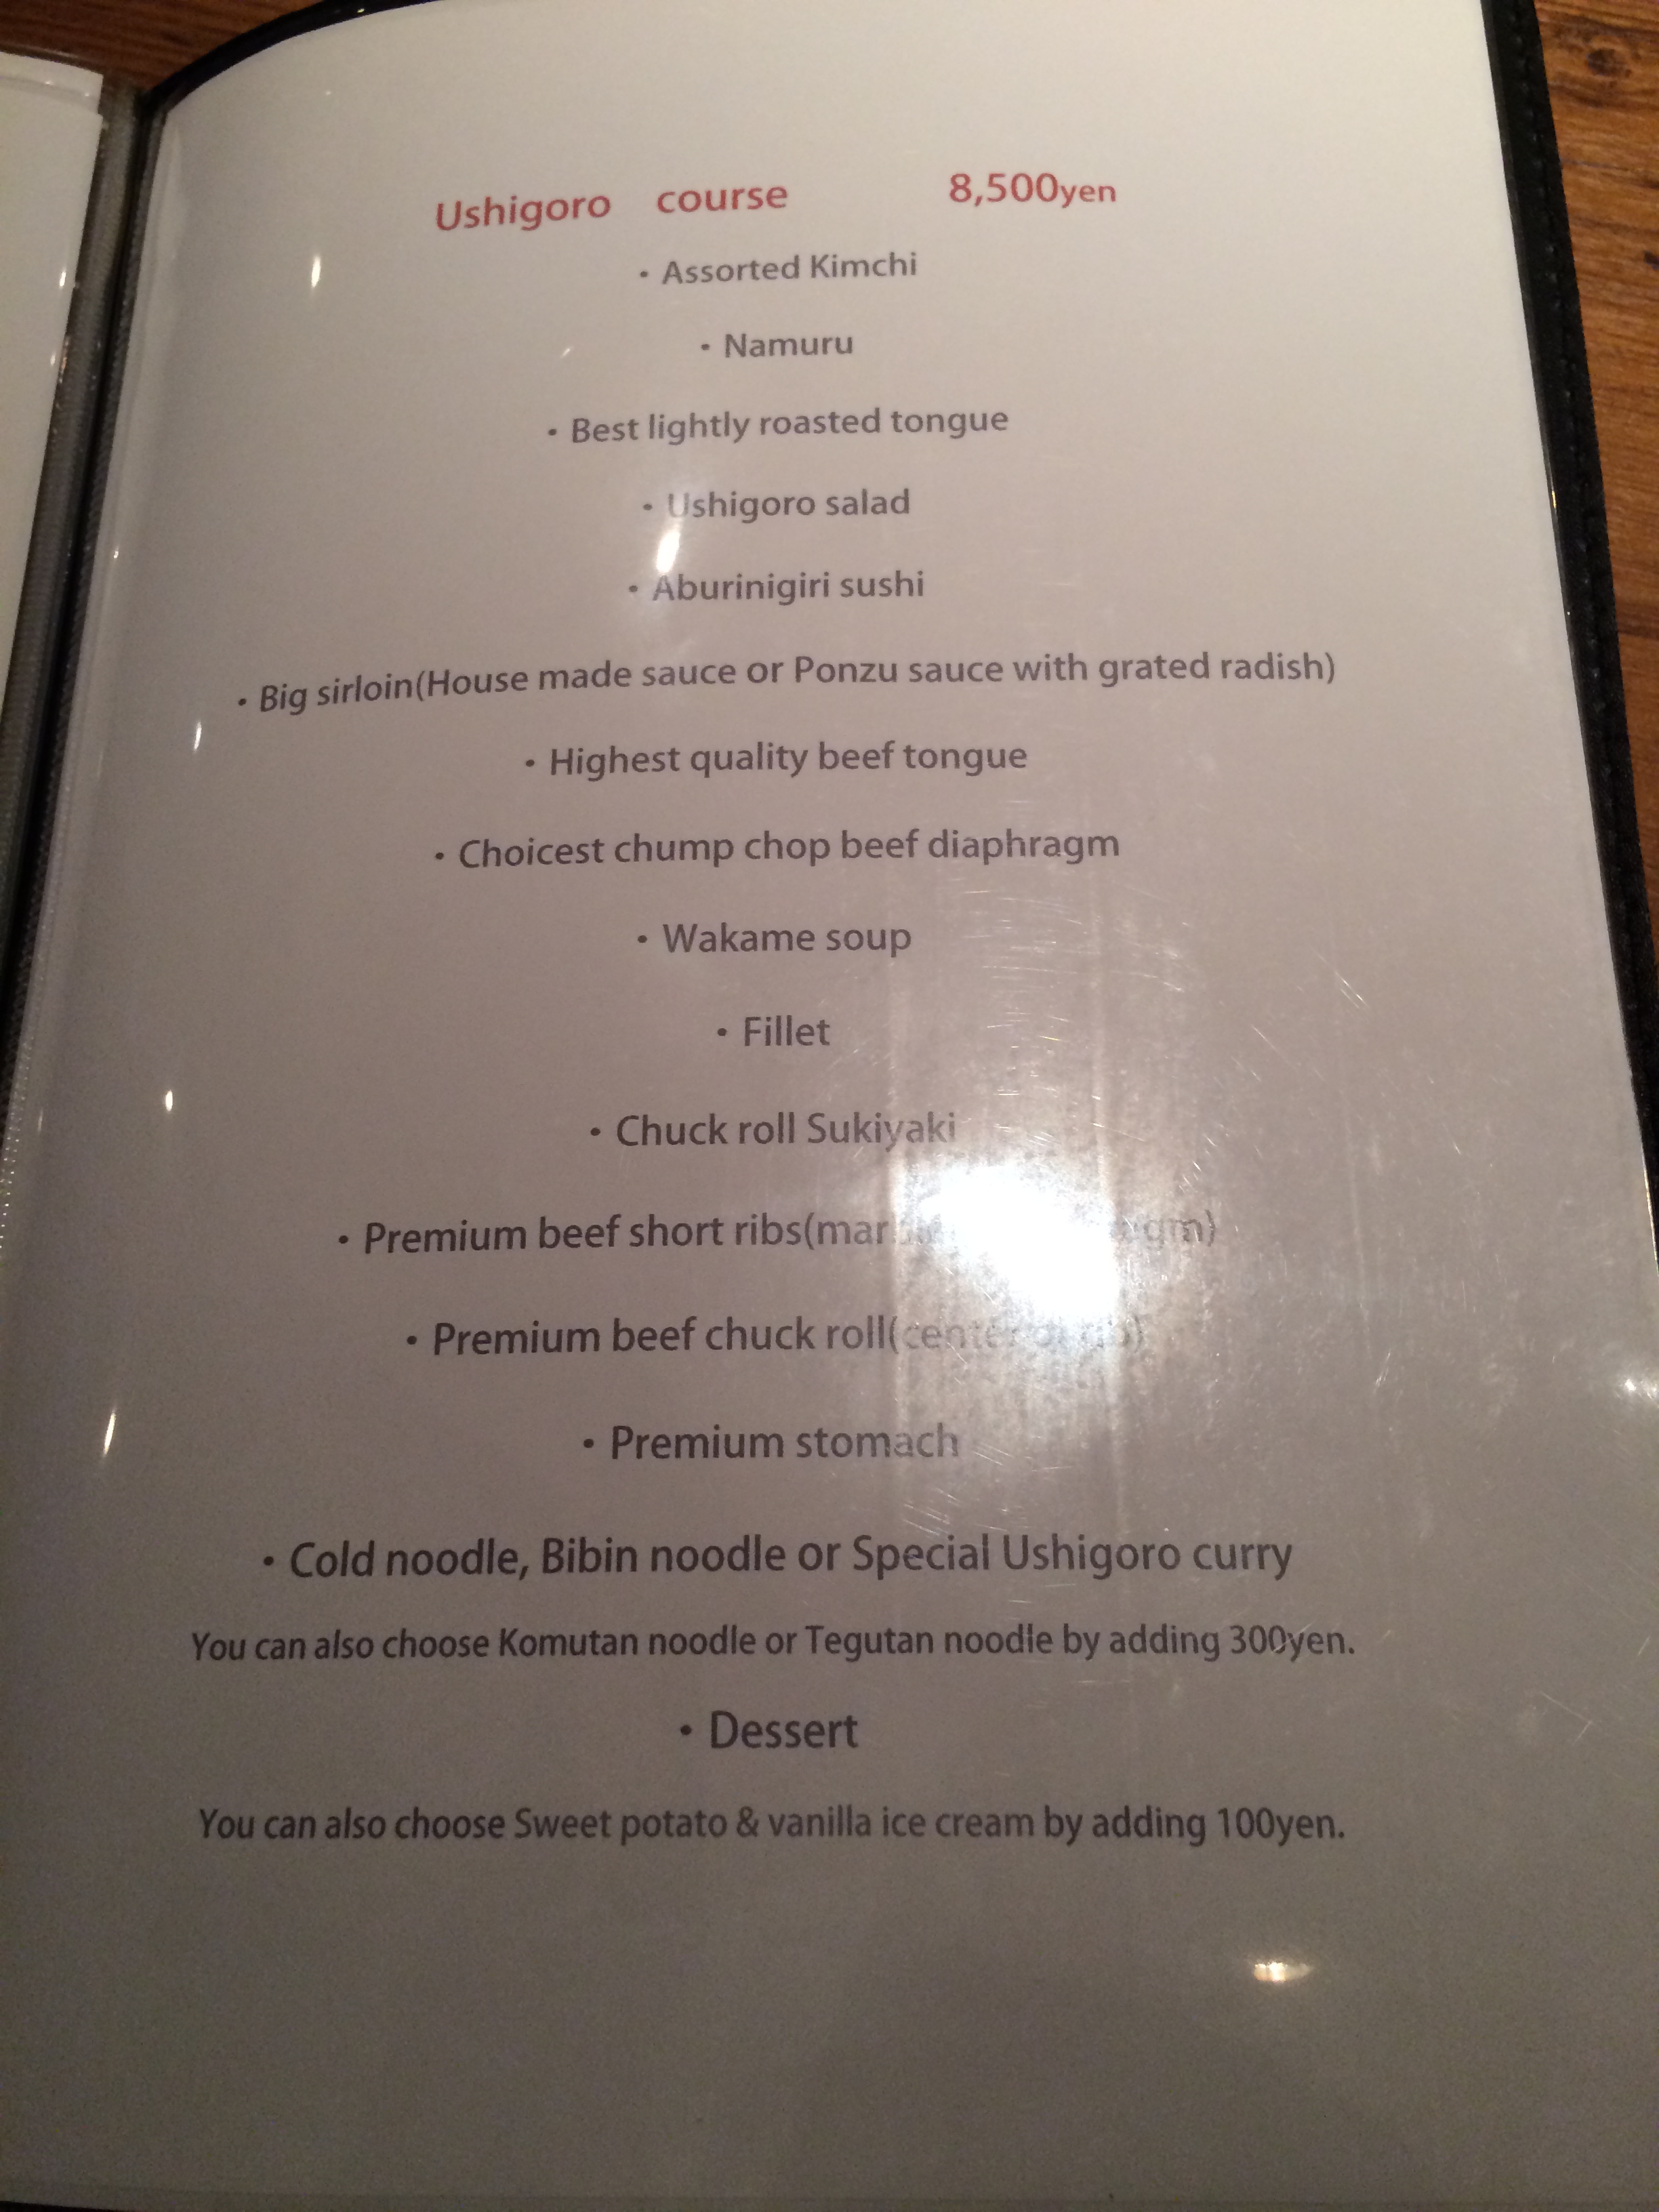 English menu (but not exactly what I ordered)